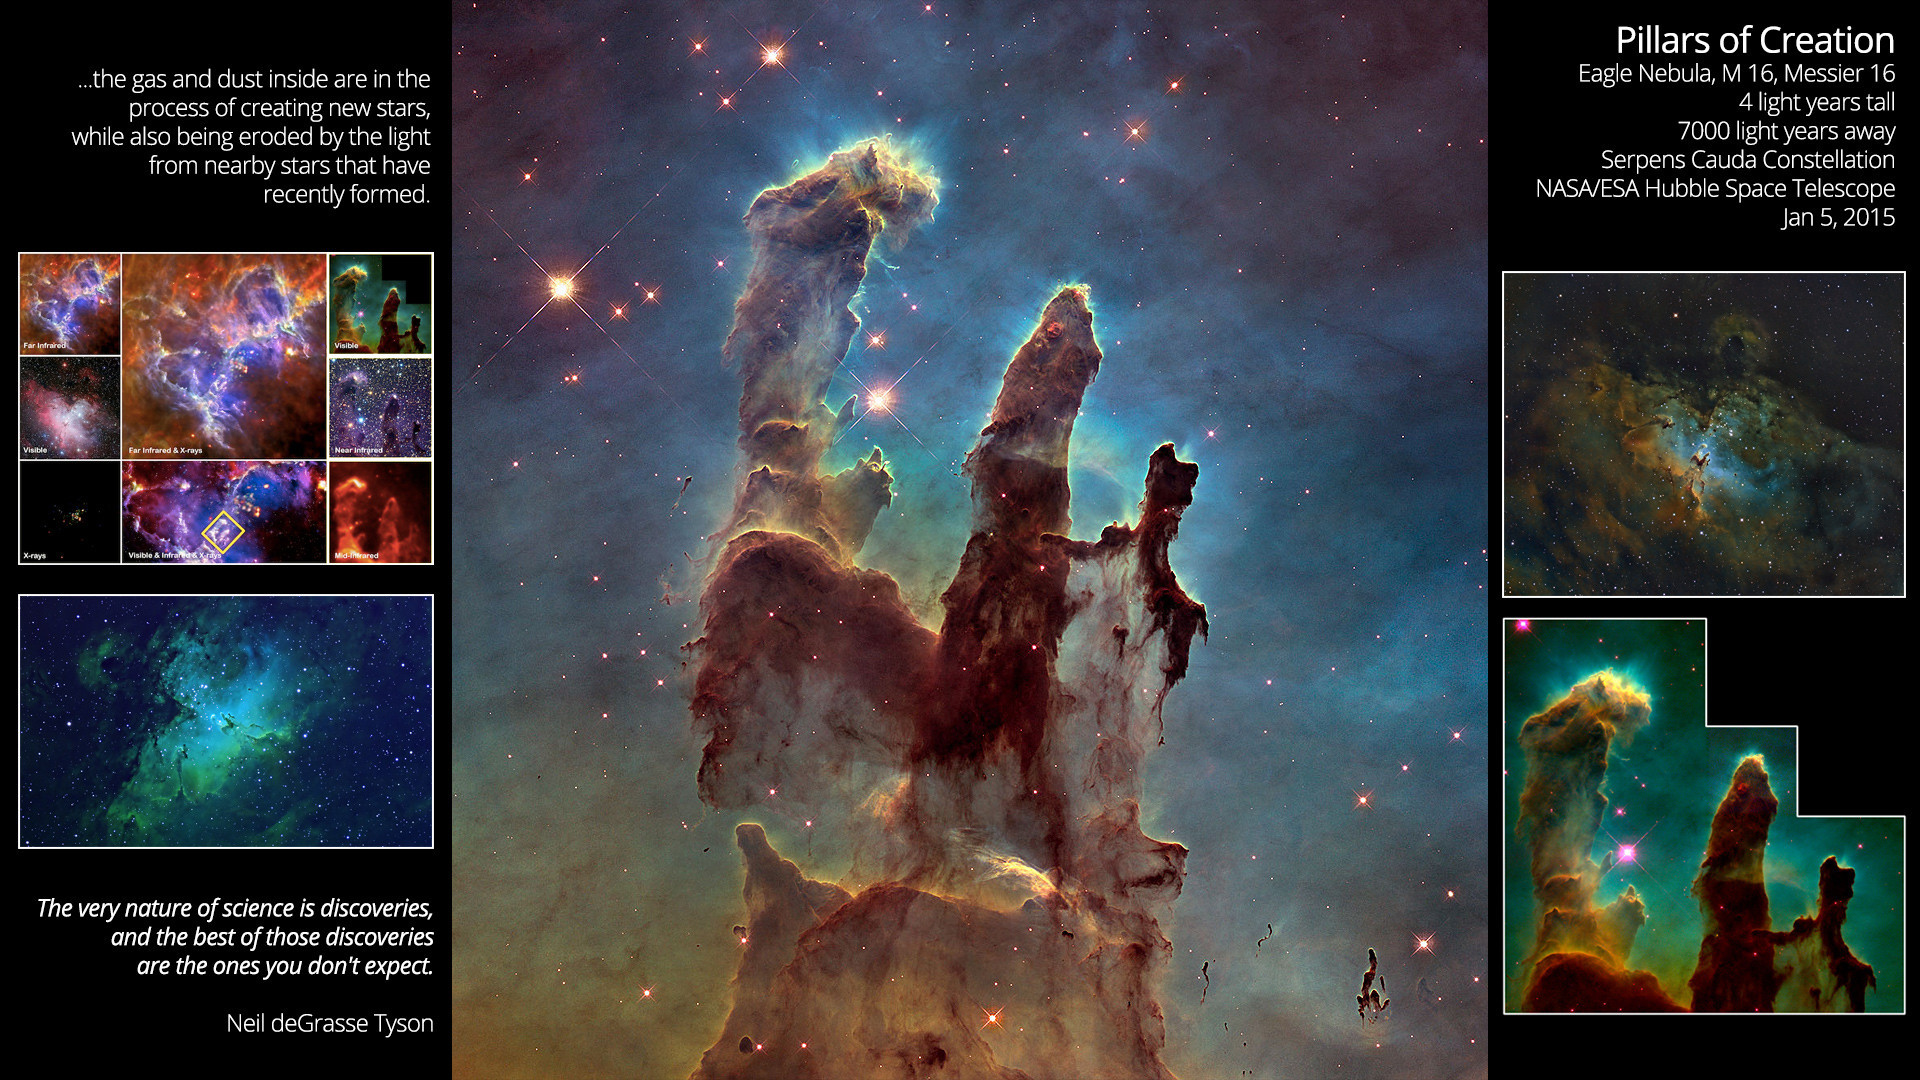 1920x1080 I made a wallpaper with the new photo of the Pillars of Creation (2014).